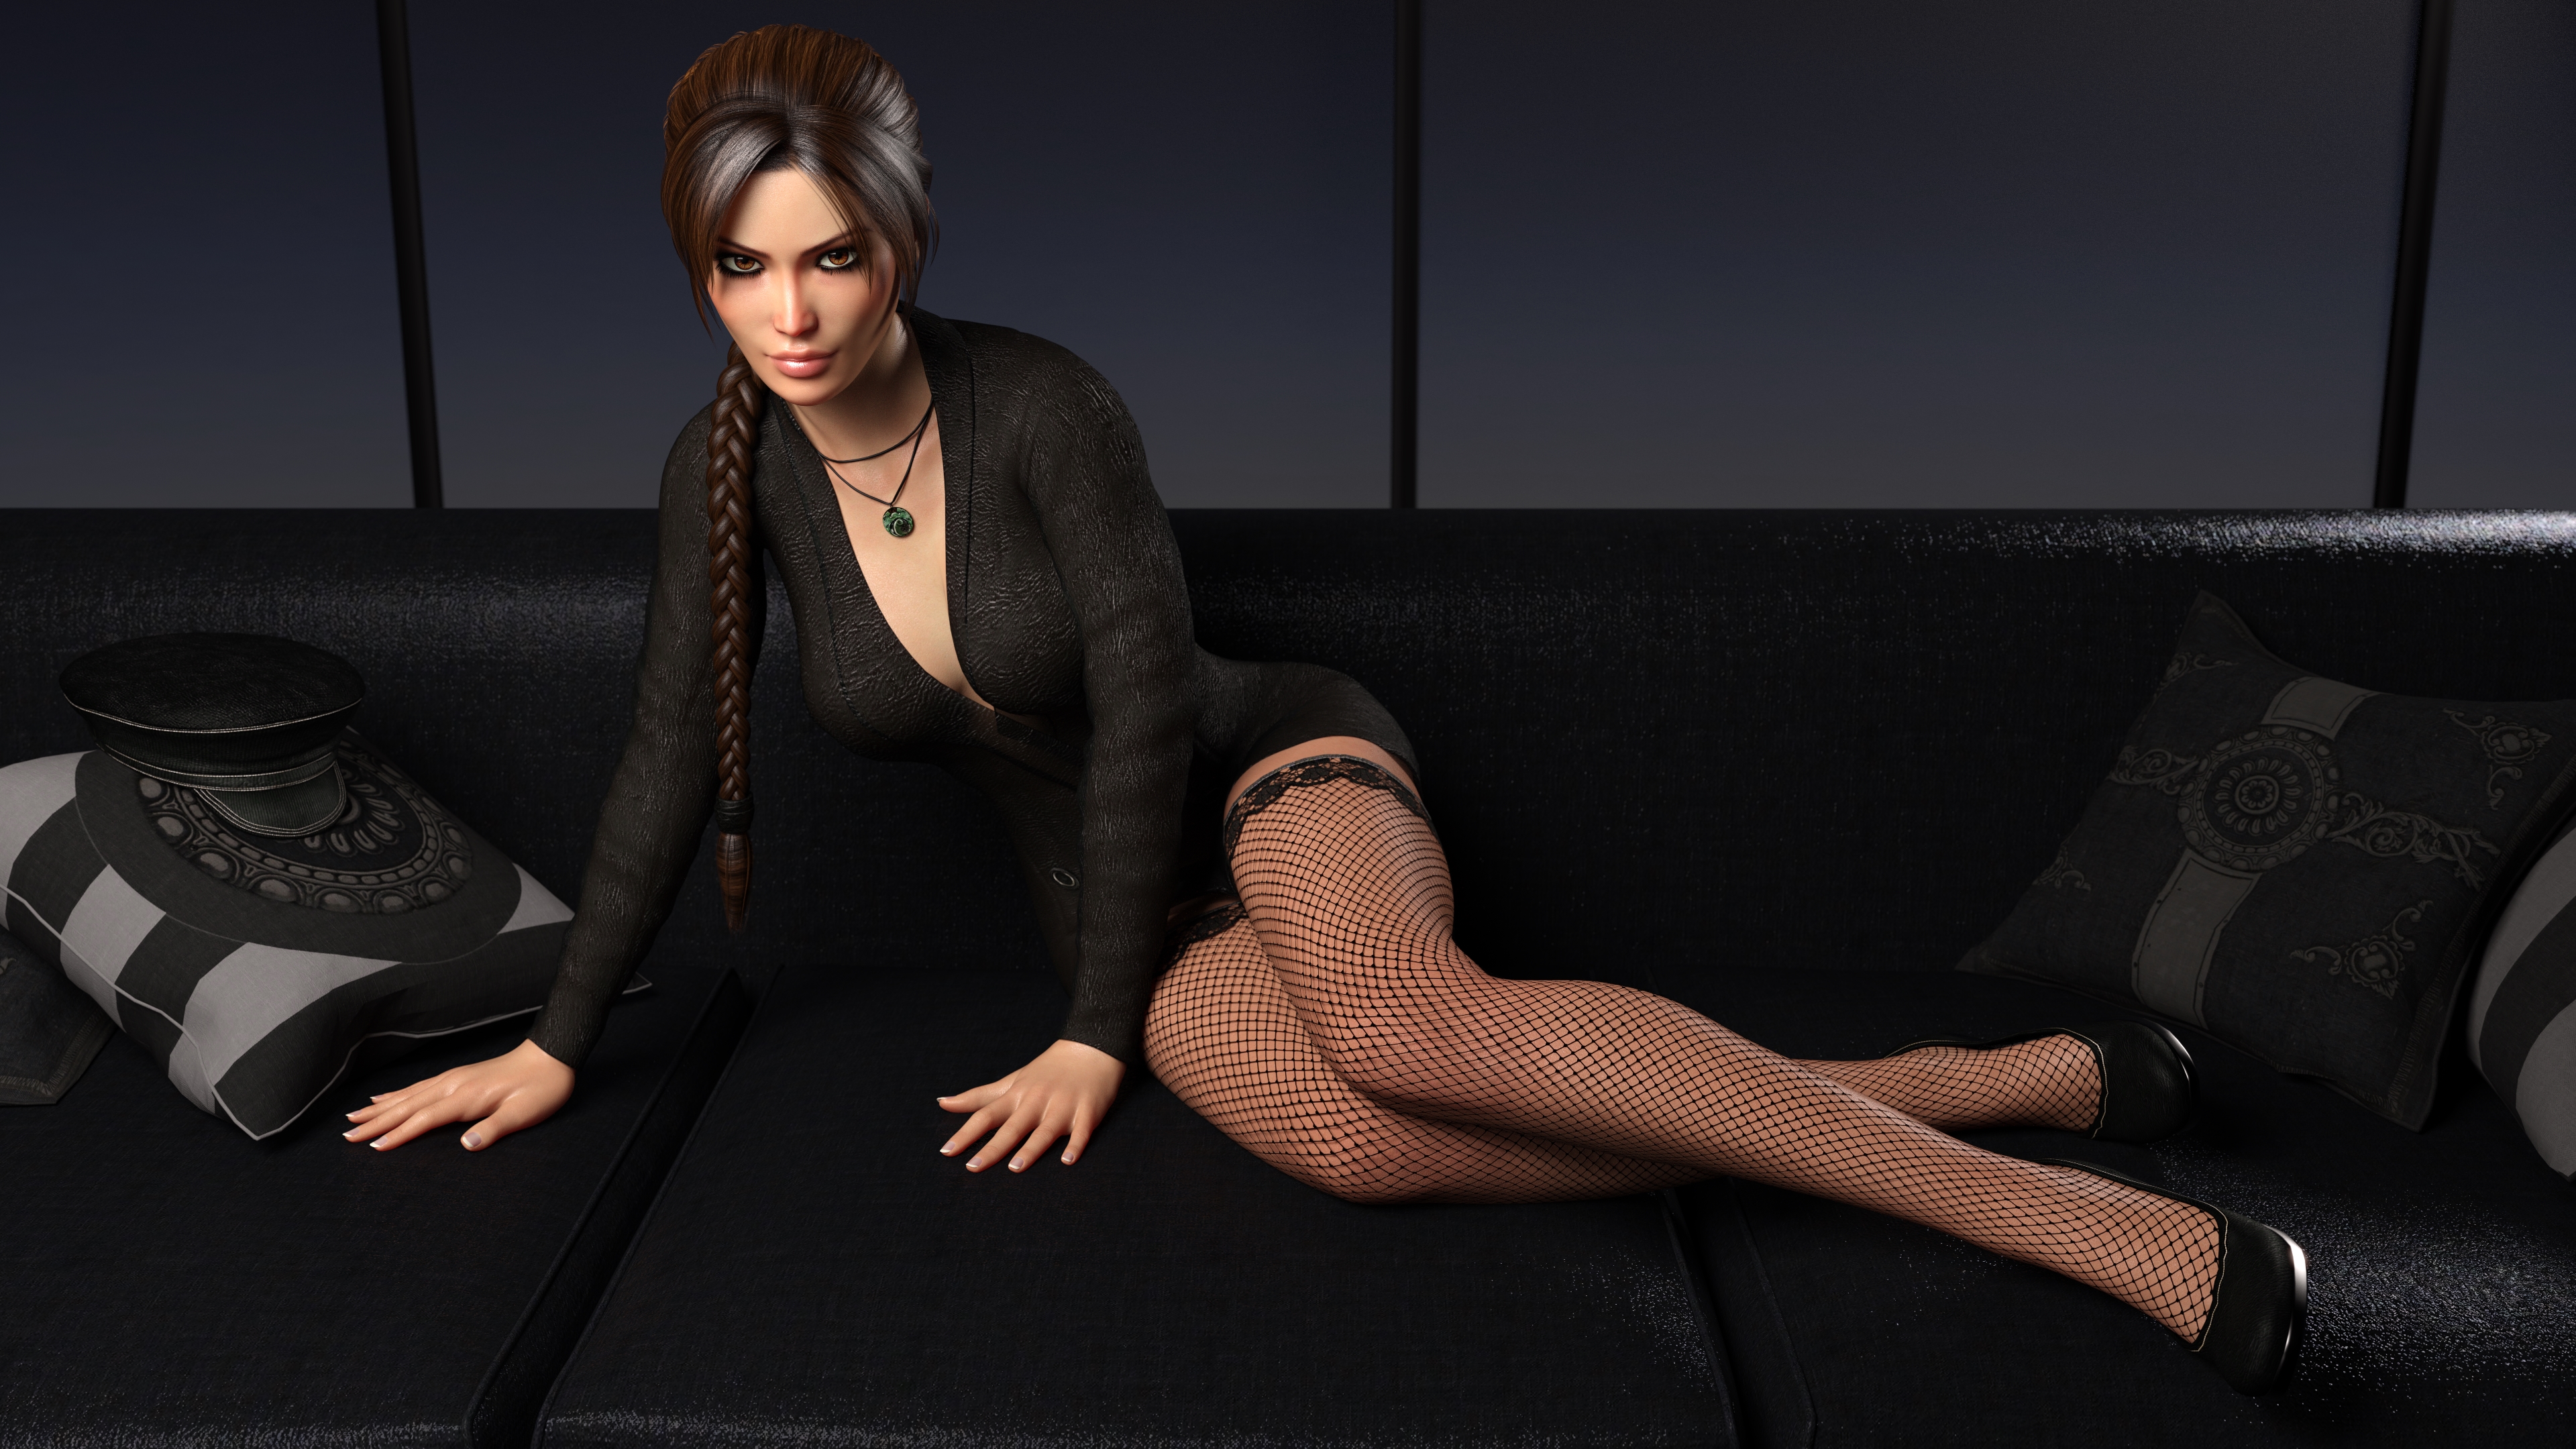 General 3840x2160 3dx CGI looking at viewer stockings Lara Croft (Tomb Raider) video games PC gaming video game girls video game characters fishnet stockings necklace DeTomasso